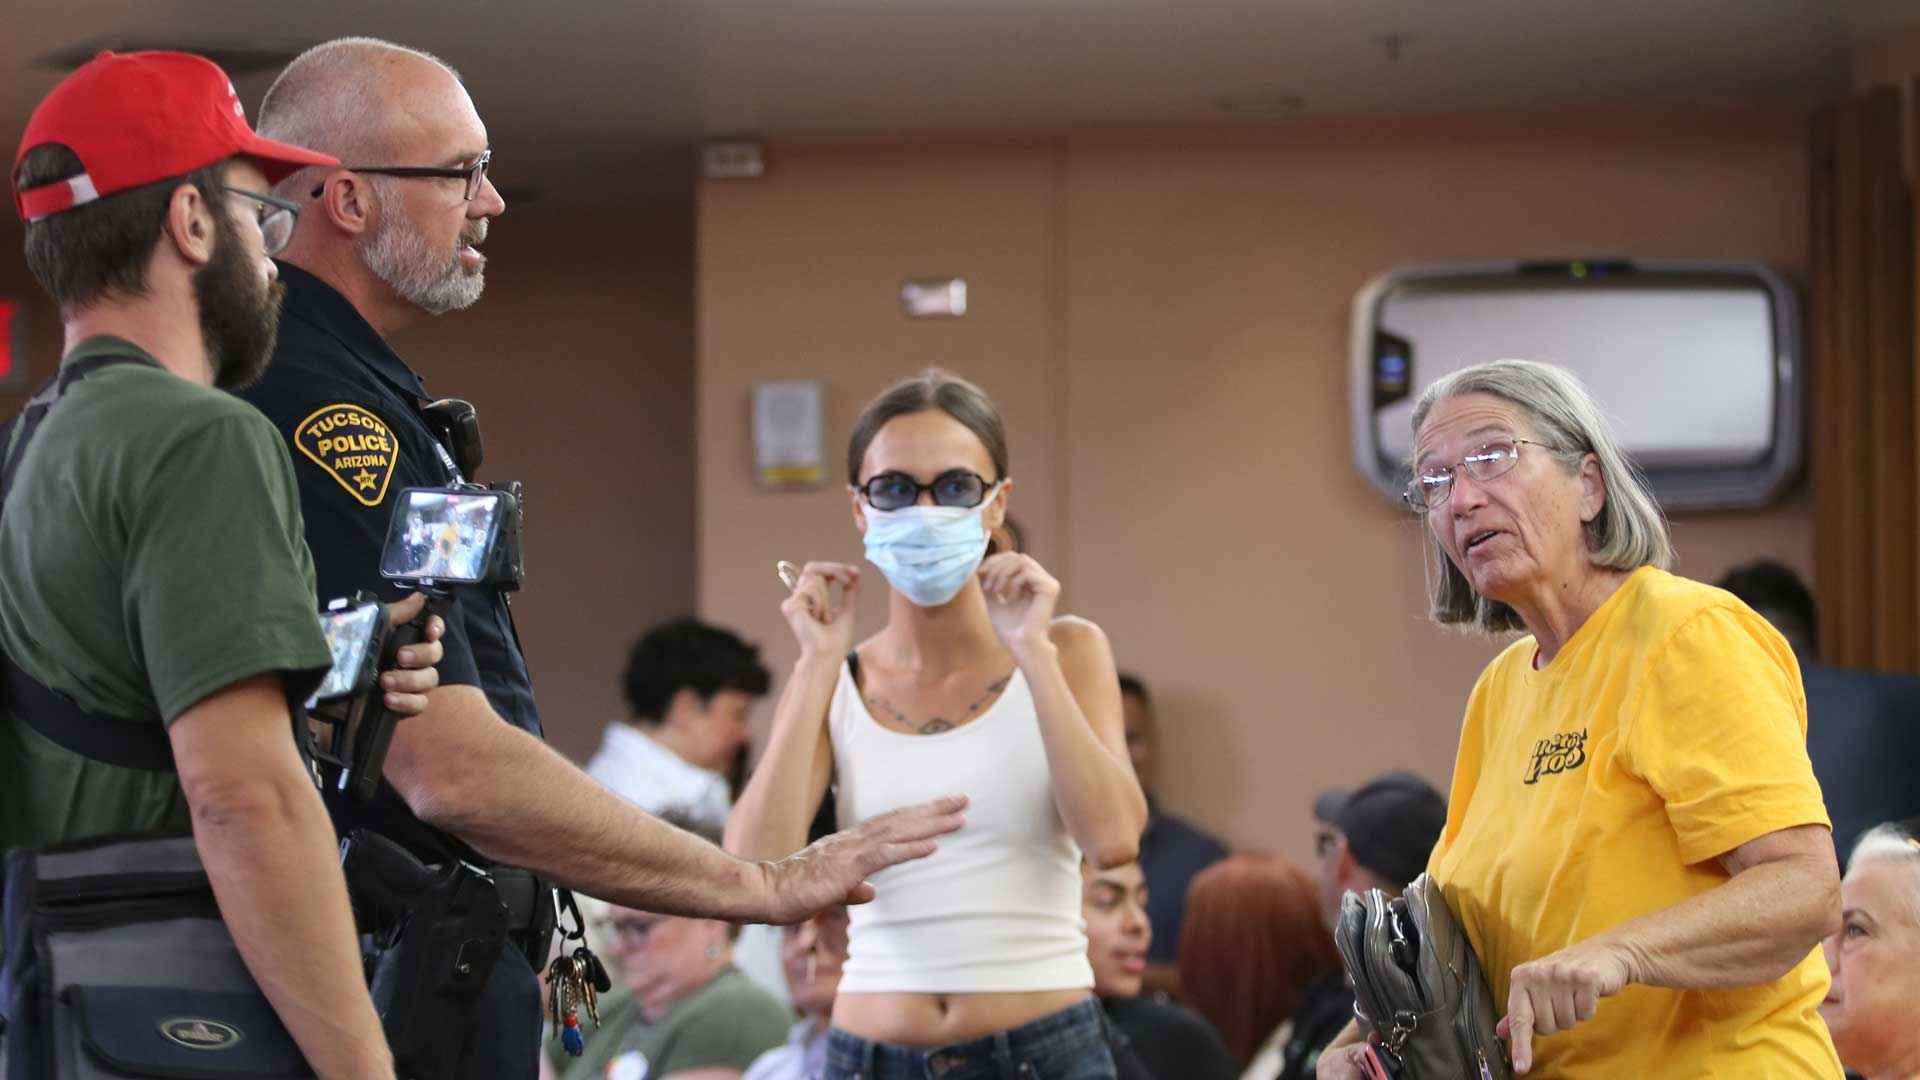 A heckler engages with another audience member as Tucson Police interjects the argument at a city council meeting on June 4. The man was eventually escorted out of the building after booing several proclamation decisions.